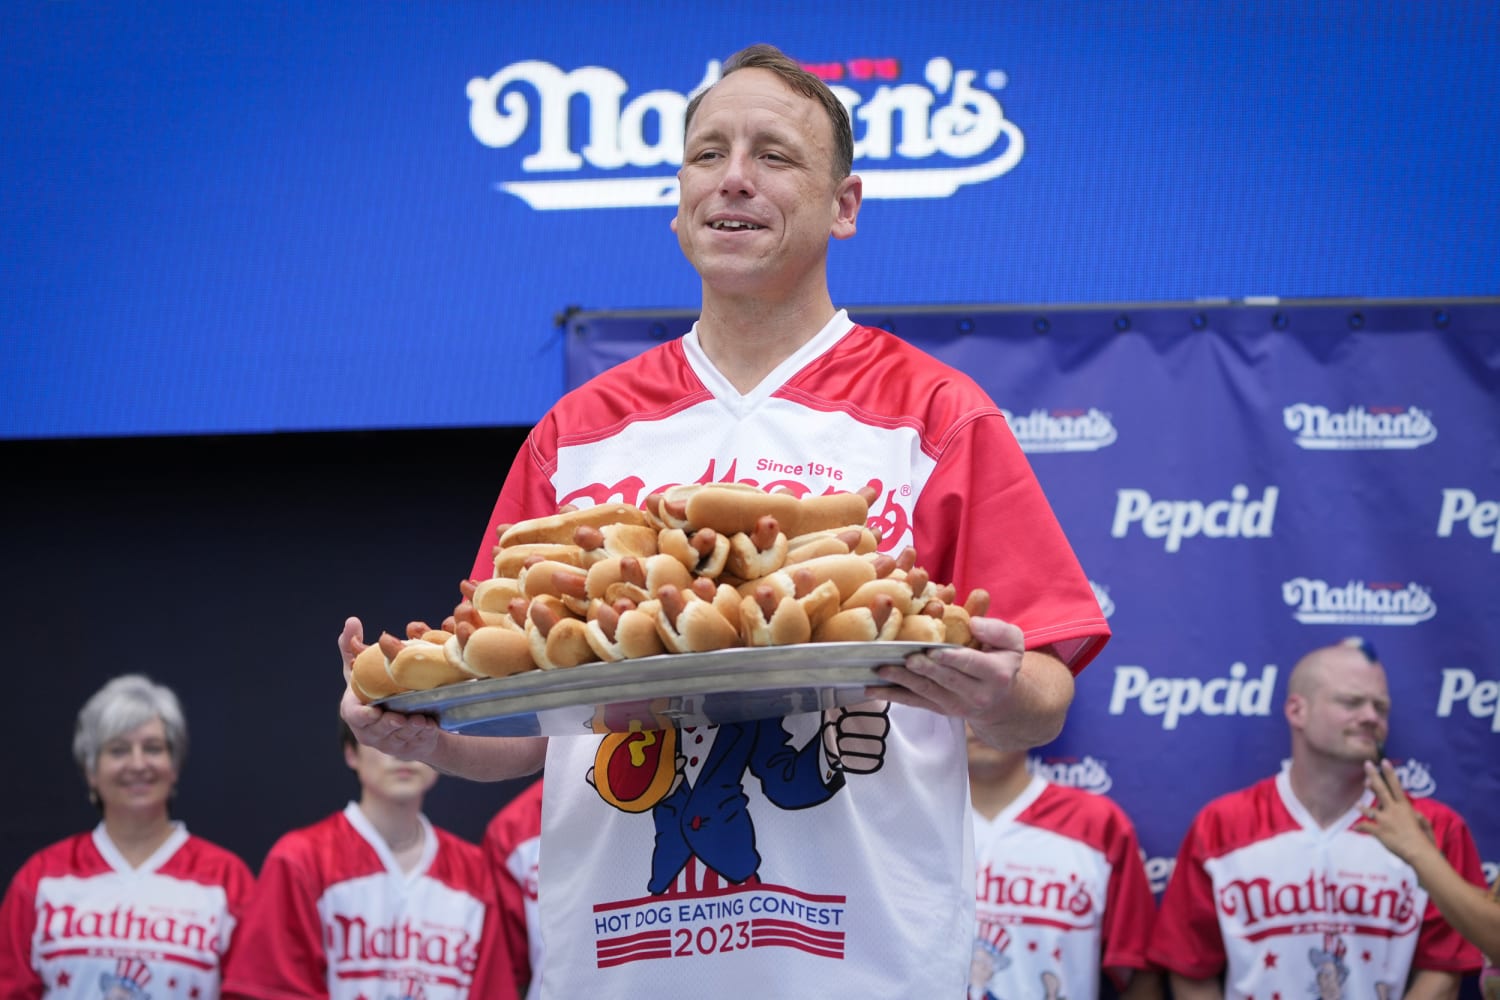 Nathan's is the winner of its hot dog eating contest with Joey 'Jaws'  Chestnut out